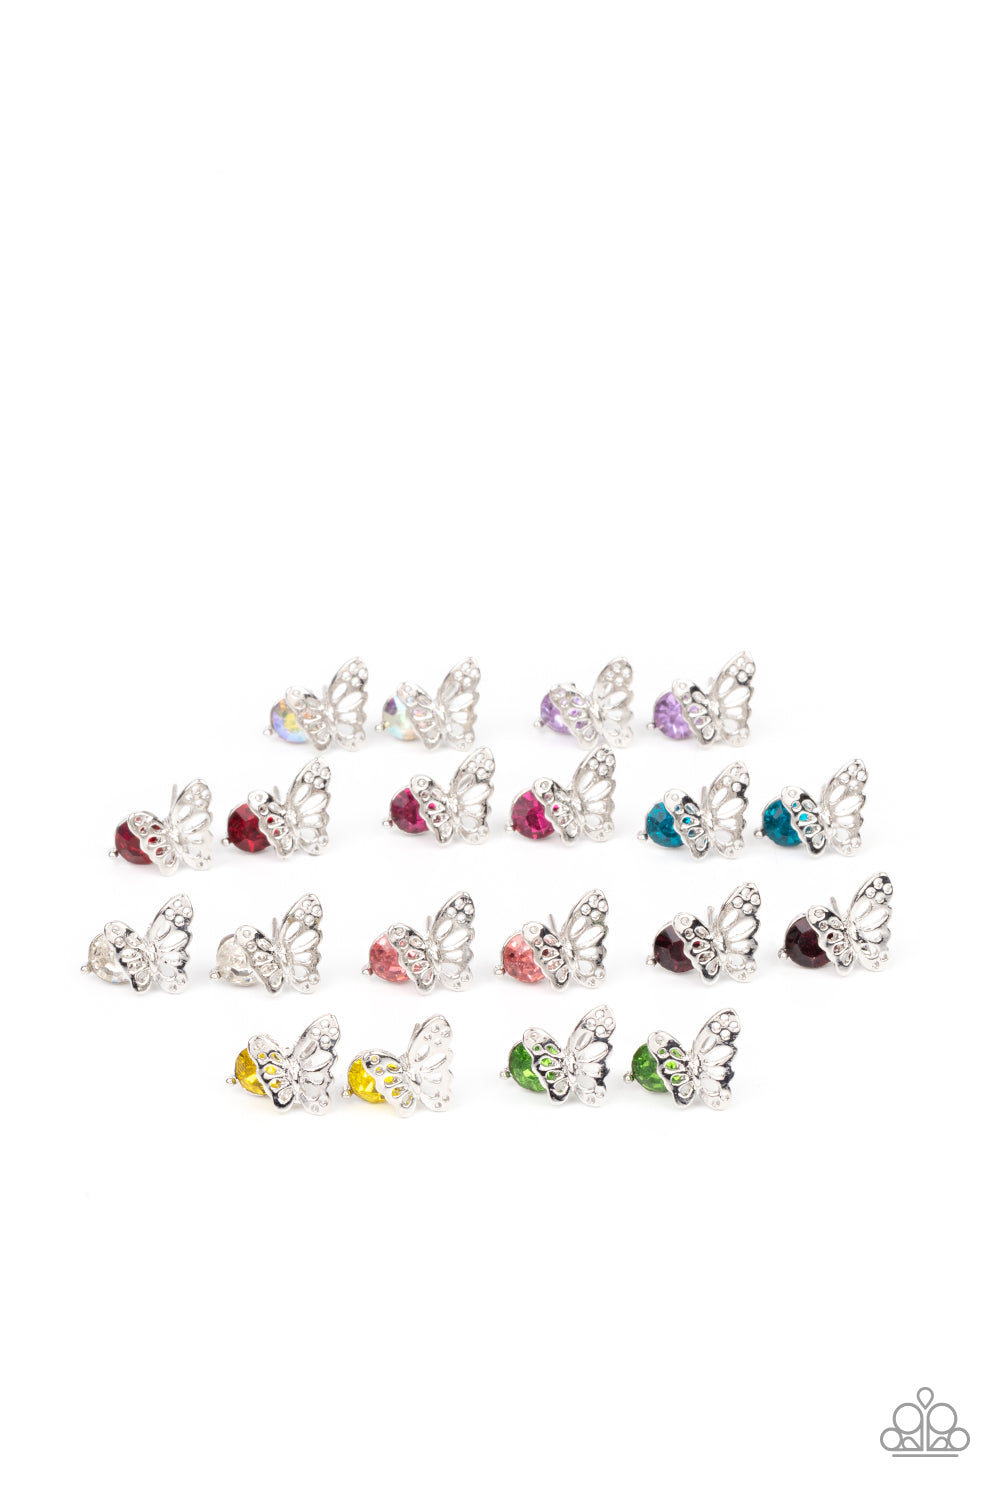 Colored Rhinestone Silver Butterfly Post Children's Earrings - Paparazzi Starlet Shimmer